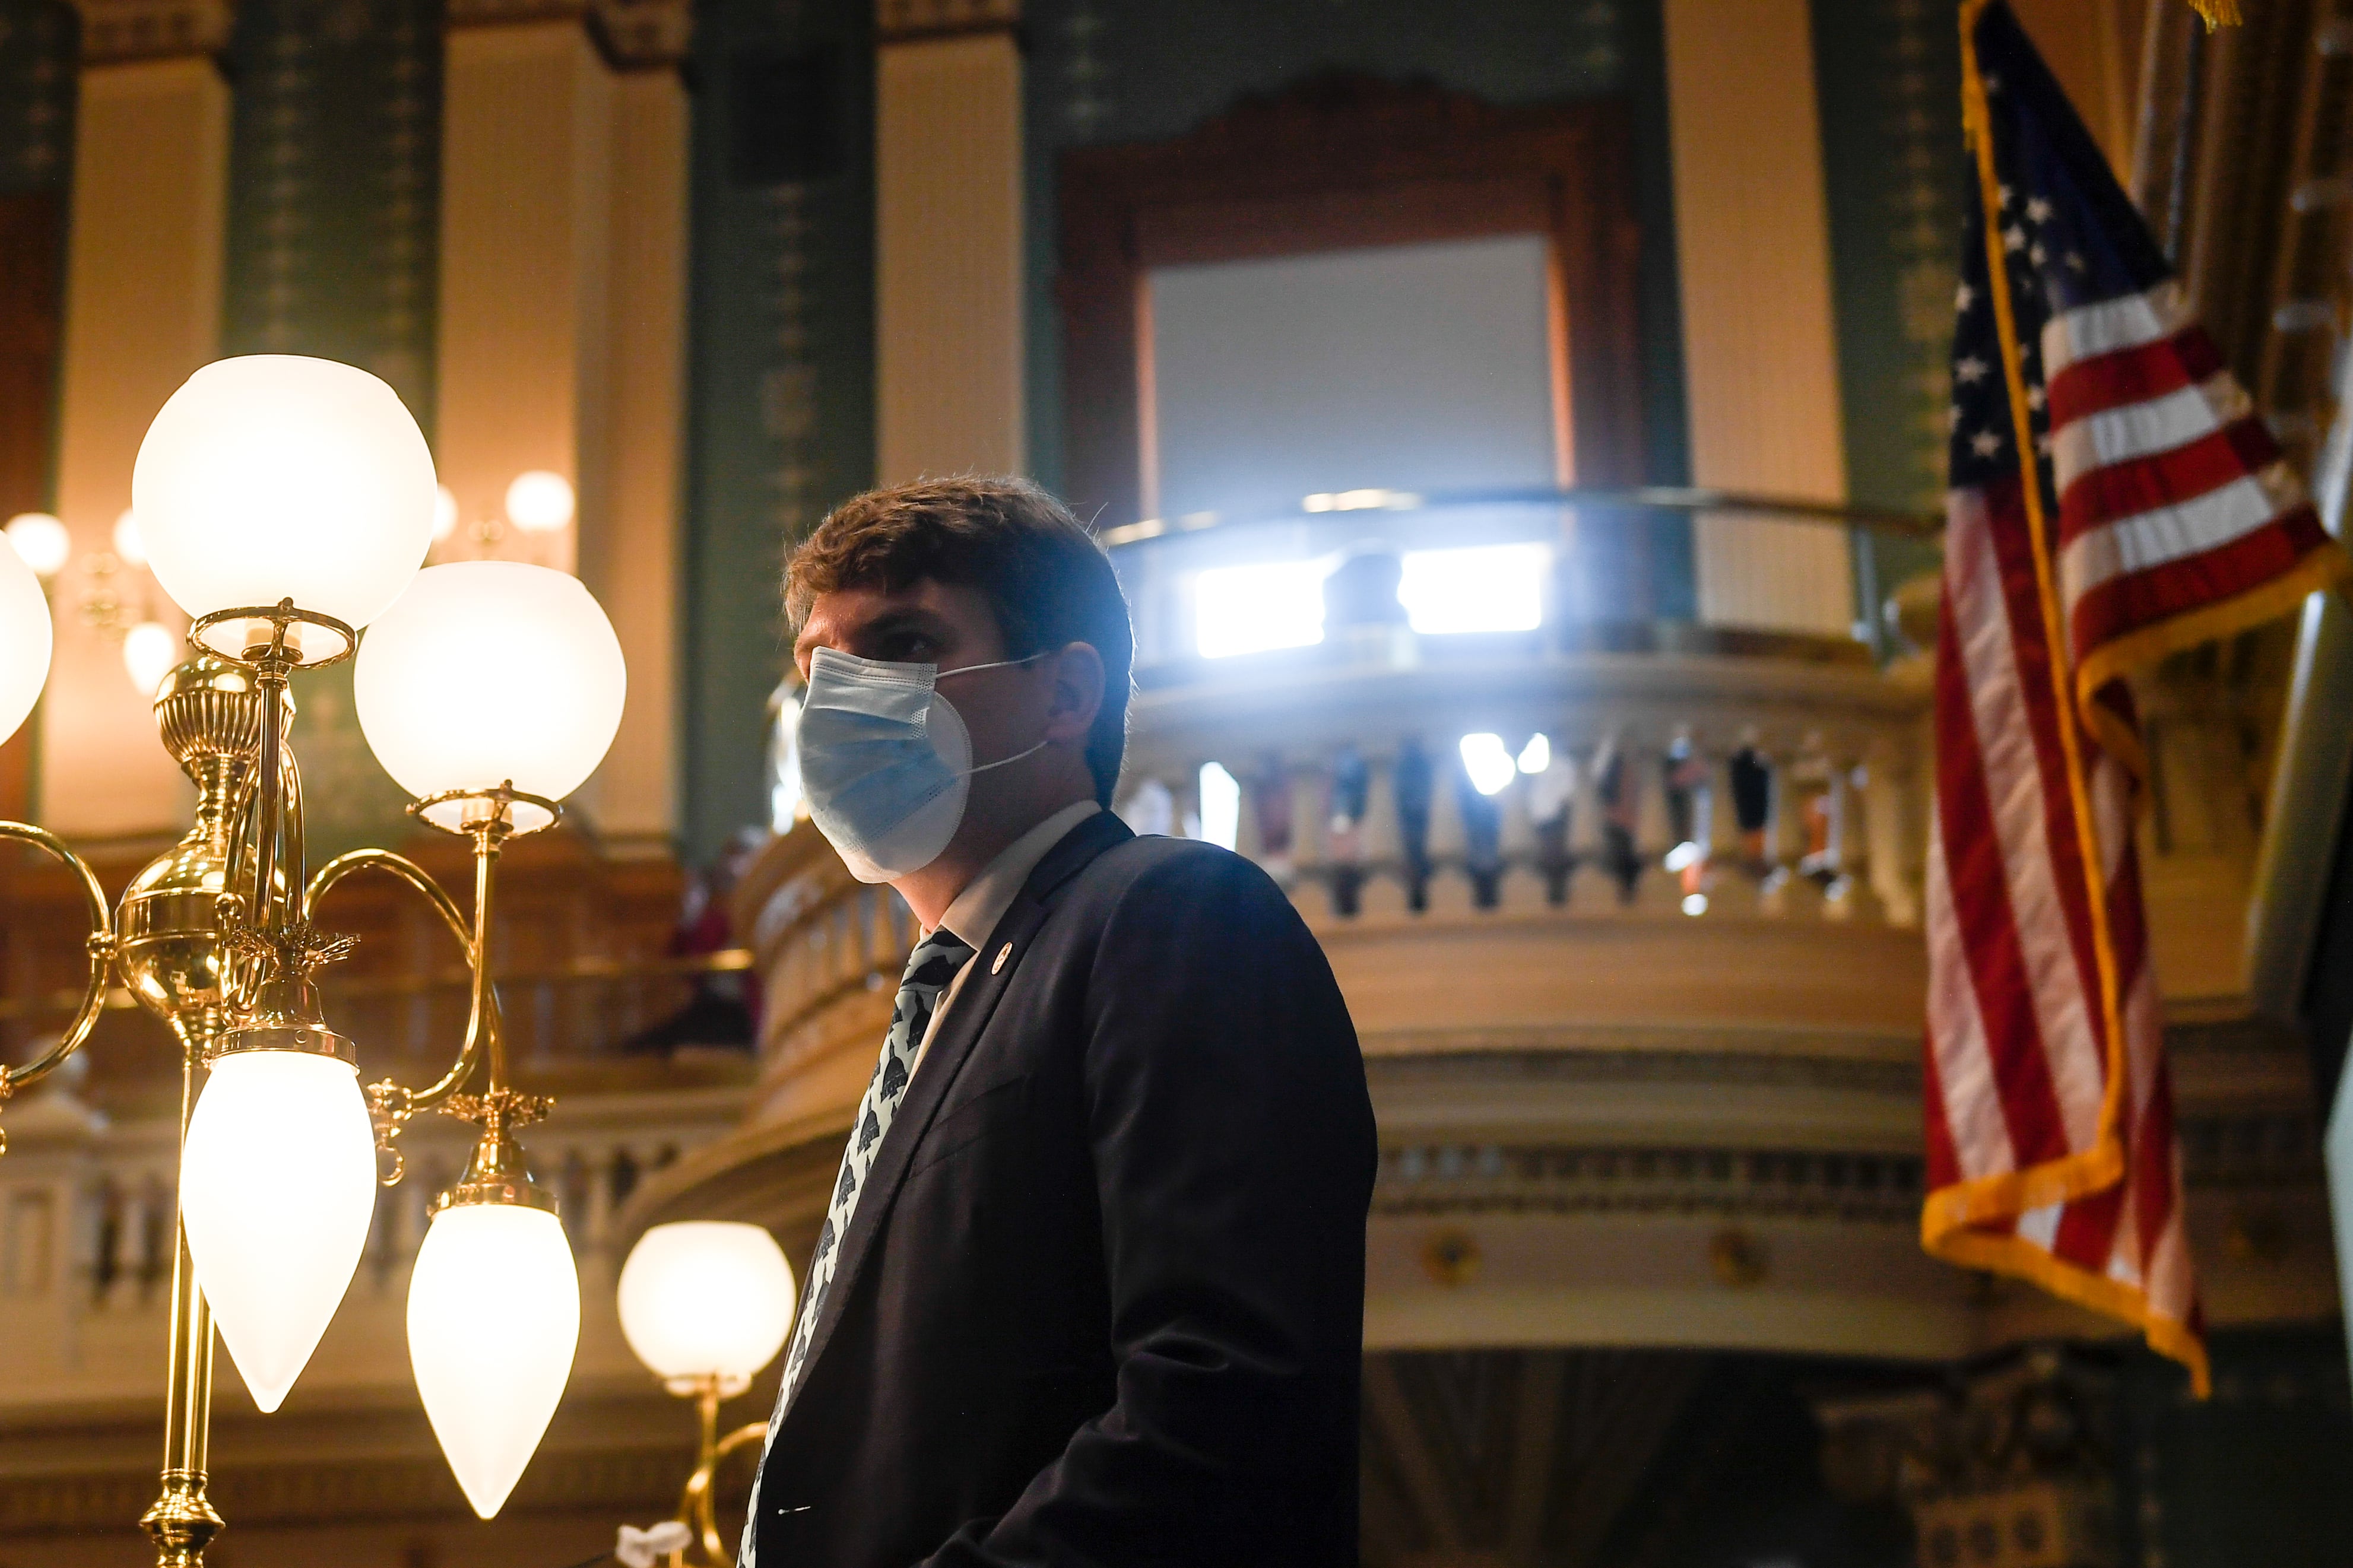 Colorado Speaker of the House Alec Garnett listens to an introduction in the State House chambers. He is wearing mask in an ornate room.